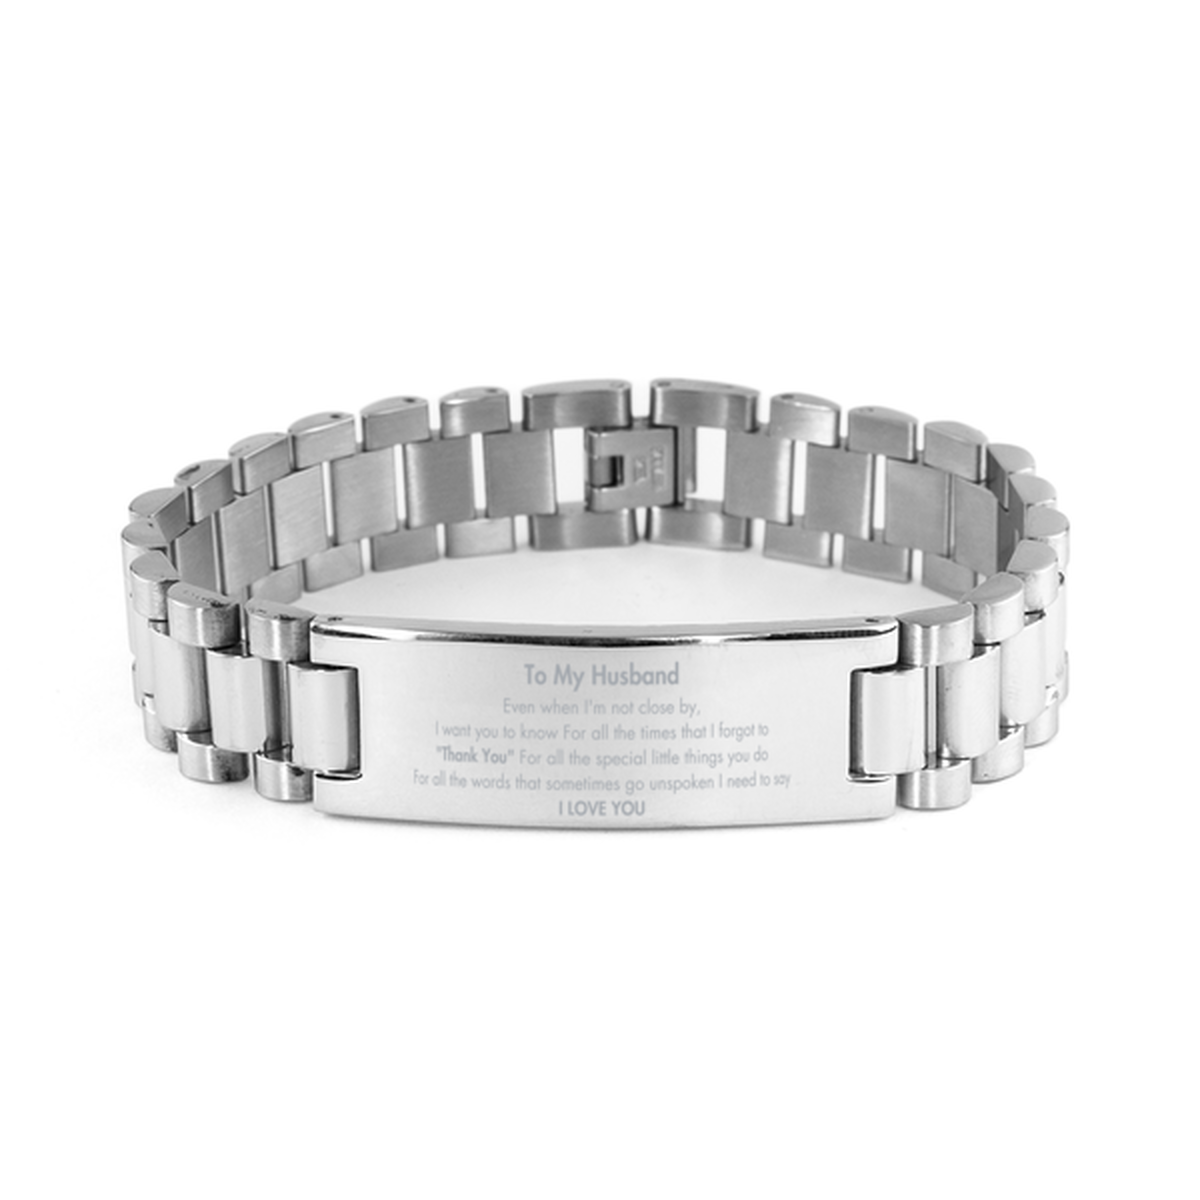 Thank You Gifts for Husband, Keepsake Ladder Stainless Steel Bracelet Gifts for Husband Birthday Mother's day Father's Day Husband For all the words That sometimes go unspoken I need to say I LOVE YOU